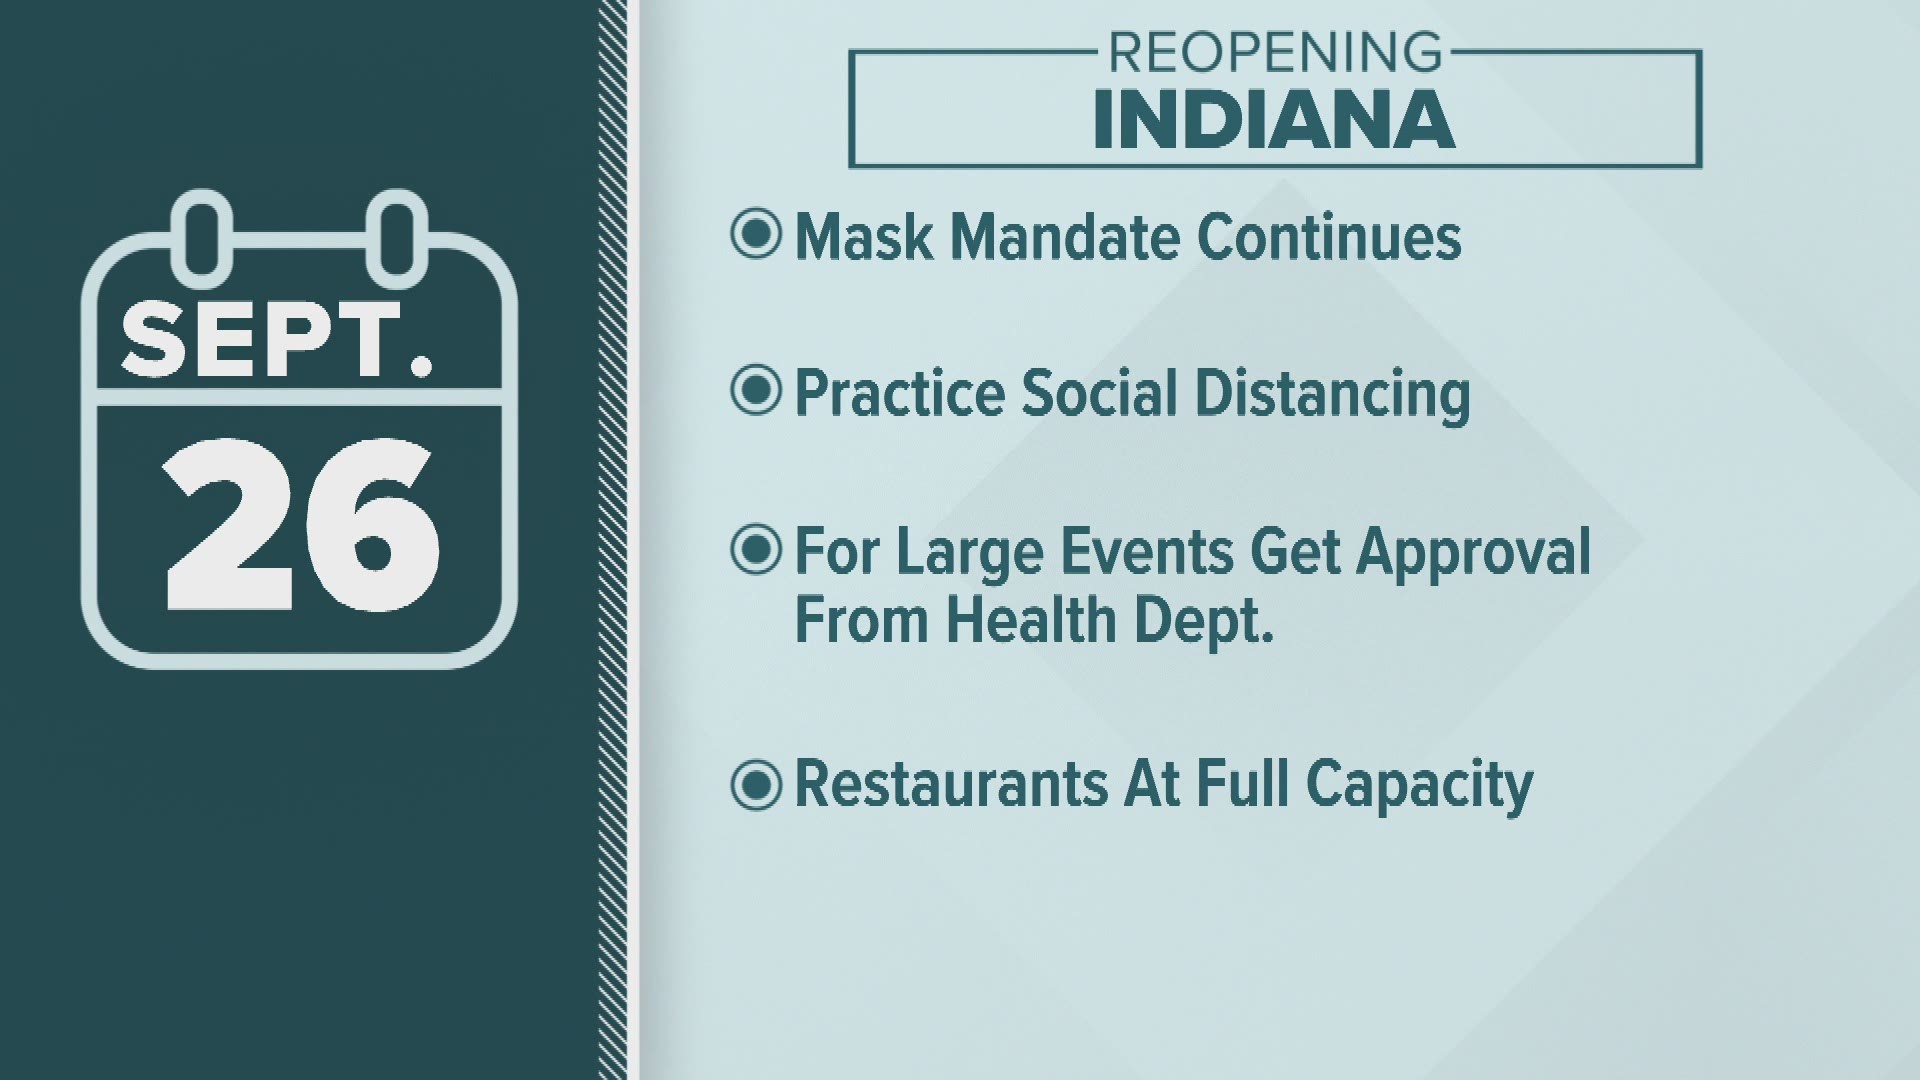 Indiana will enter Stage 5 of reopening on Sept. 26 and the mask mandate and social distancing guidelines will continue.